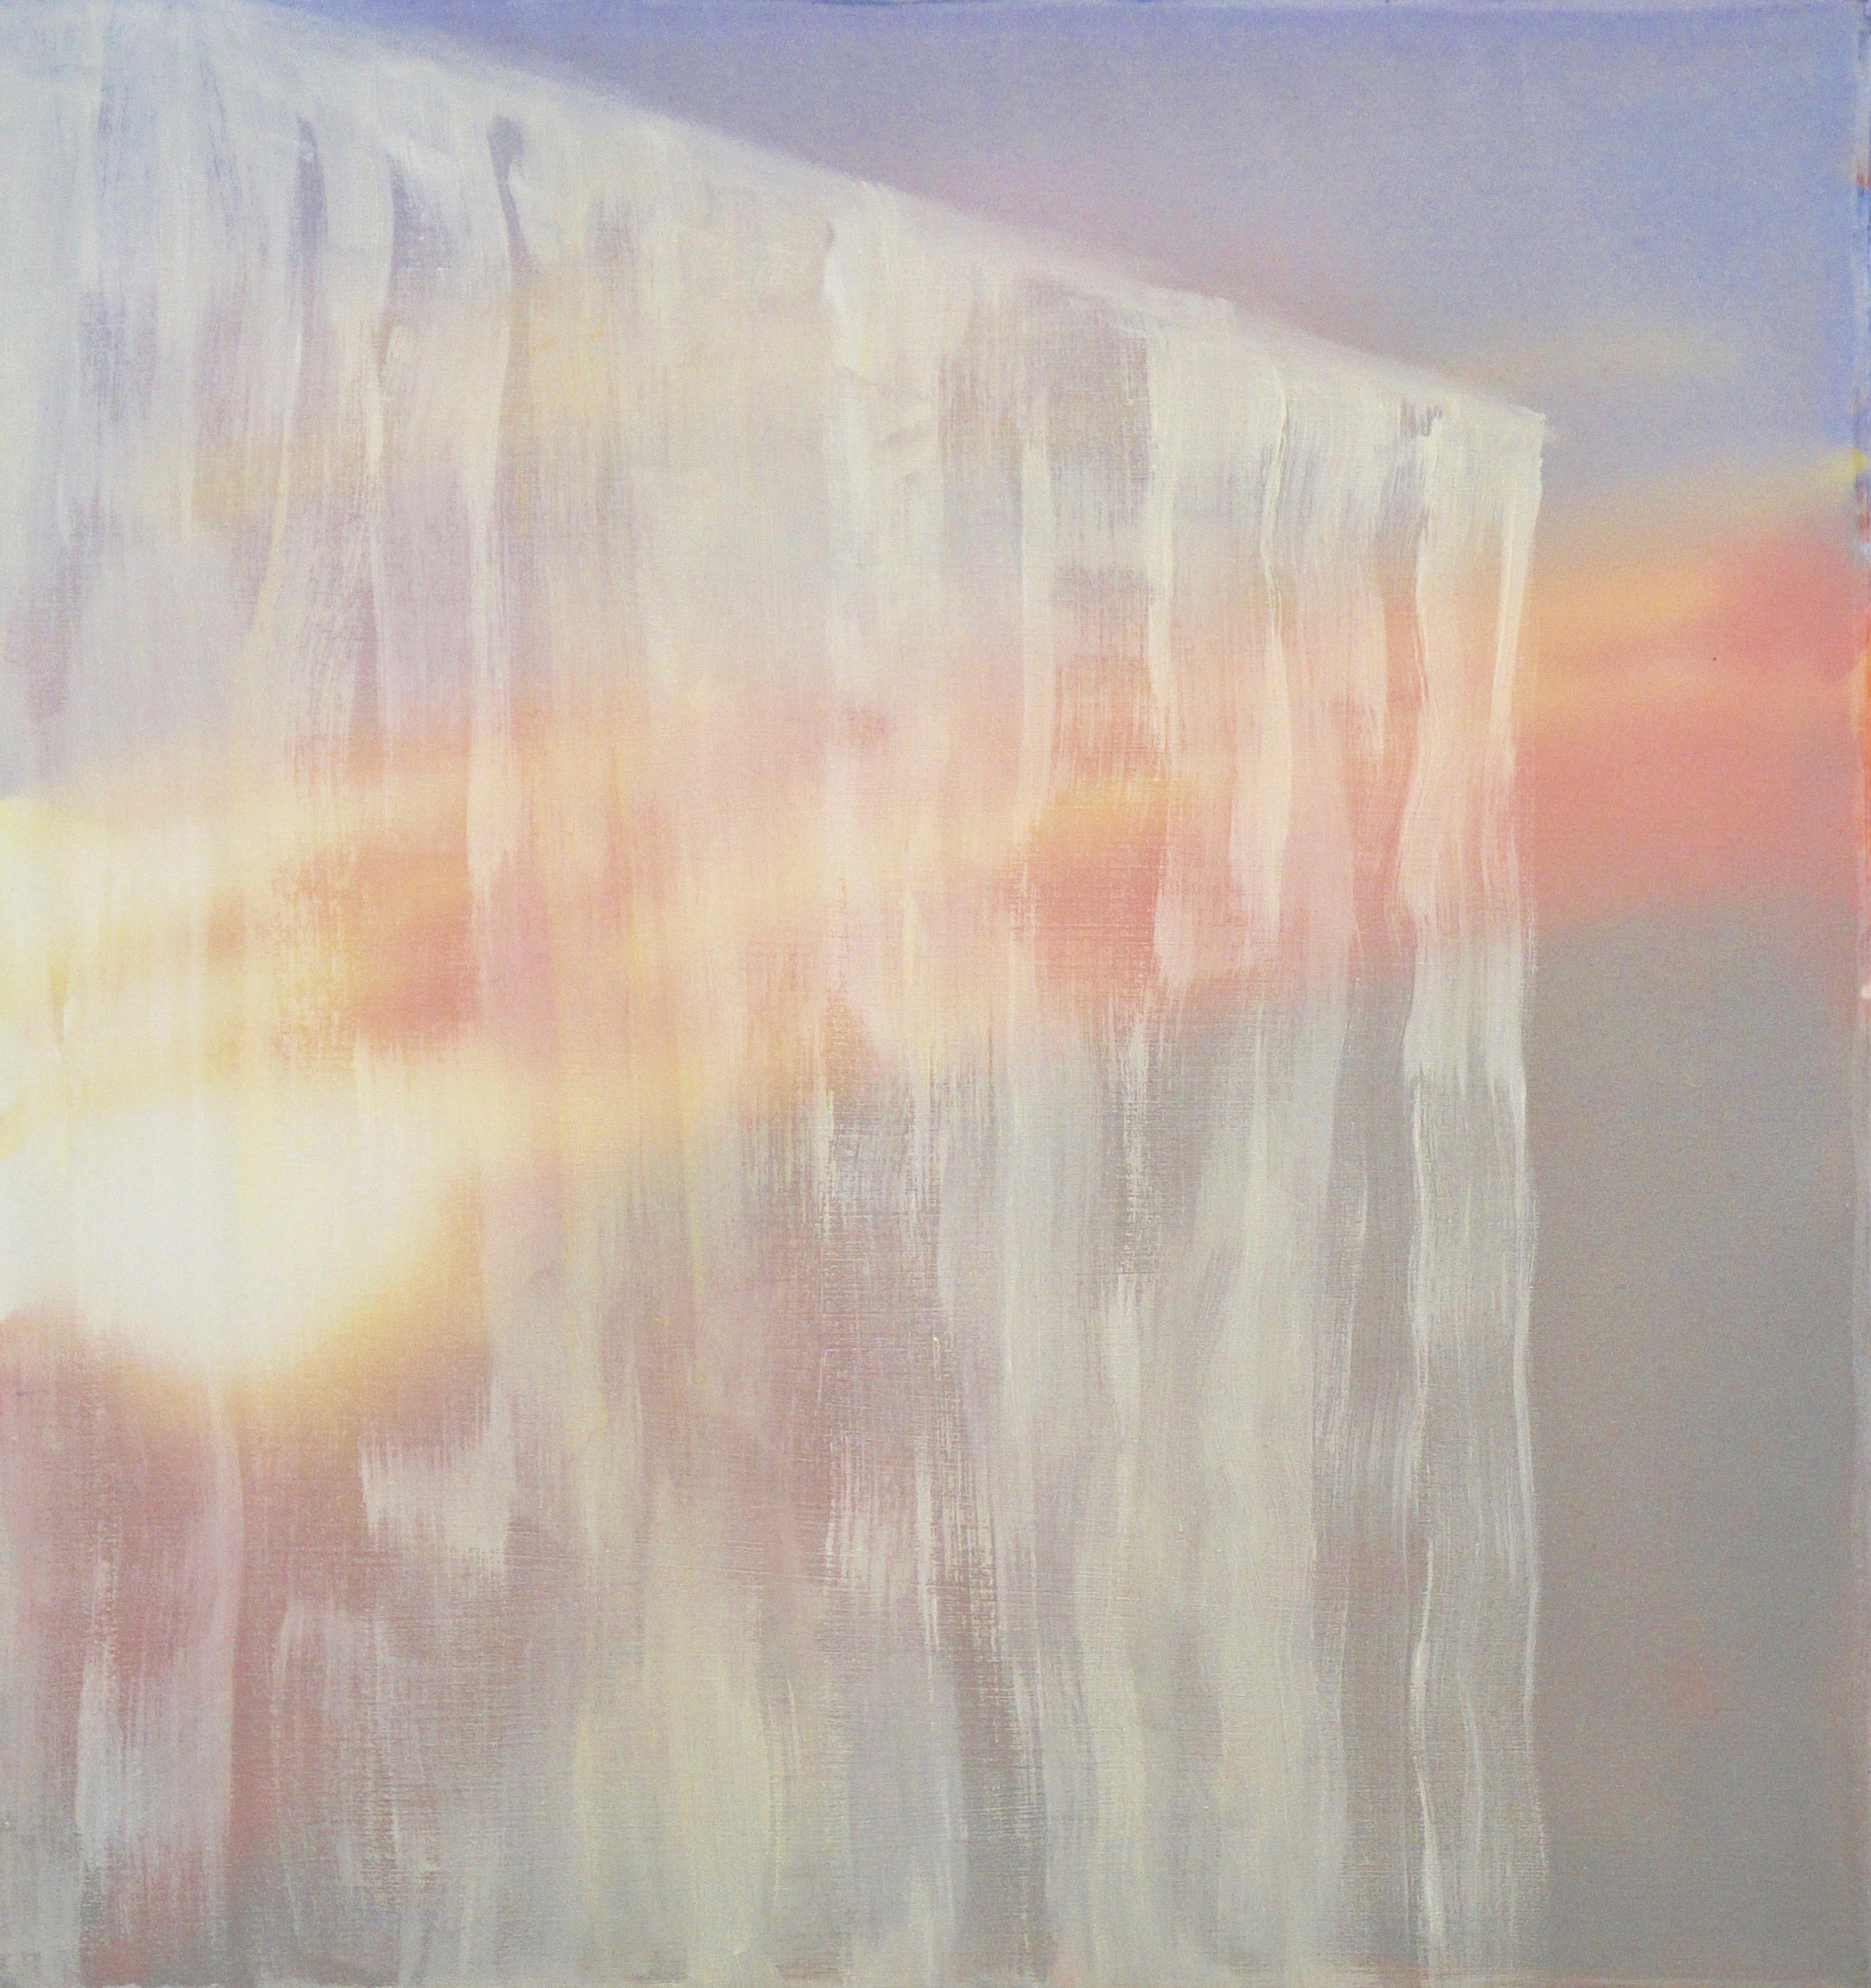 WINDOW IV - Contemporary Abstract Mixed Media Painting, light and shadow, icicle